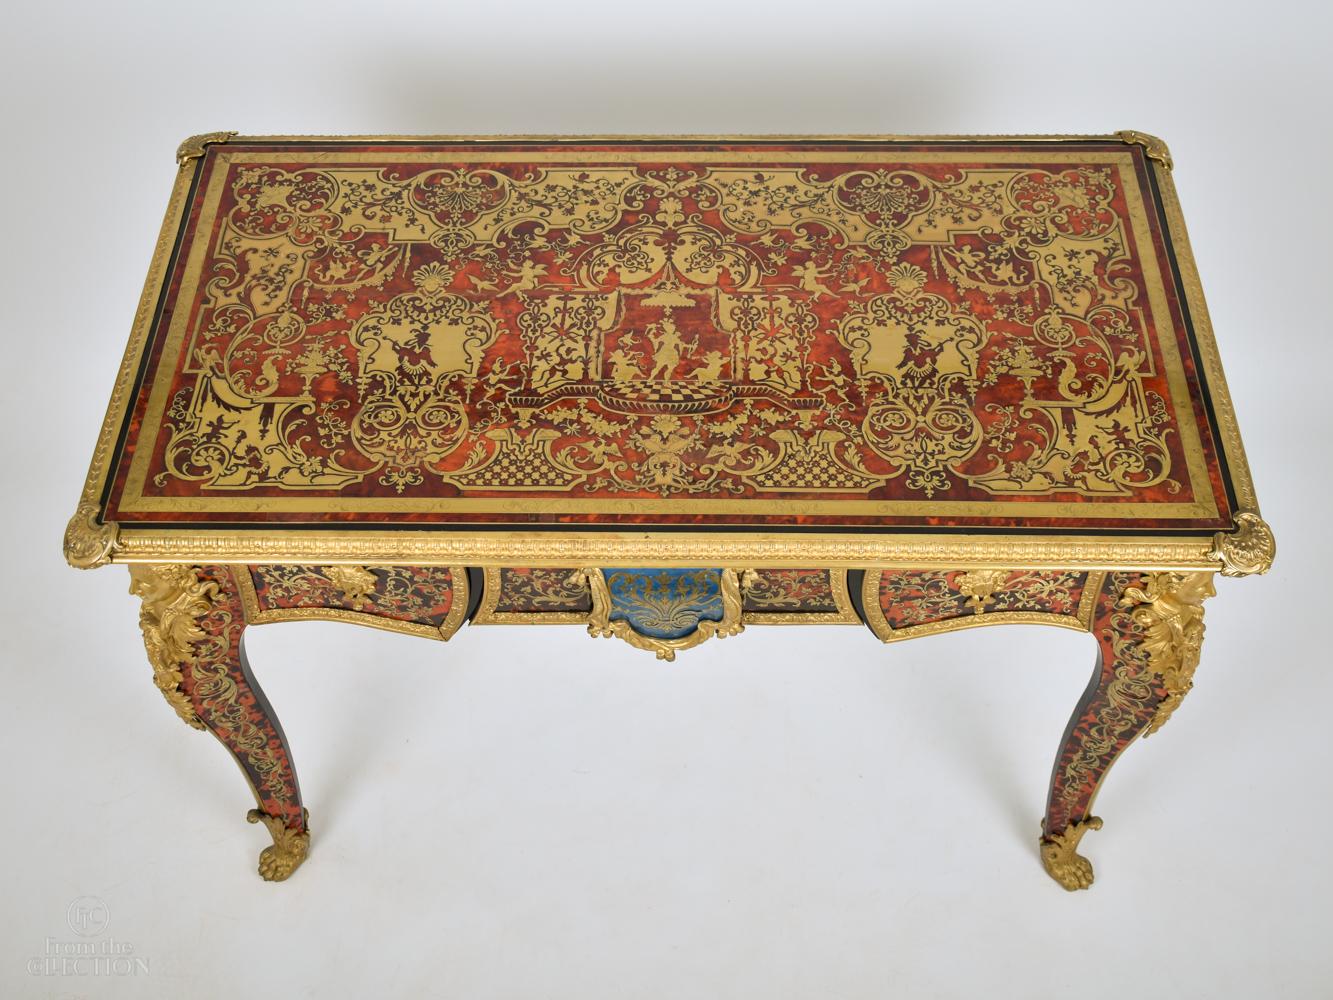 Gilt bronze mounted tortoise shell and brass inlaid Boulle centre table. Late 19th Century early 20th century. Exquisitely detailed Jean-Jacques Boulle centre table with gilt bronze mounts and edging three drawers to the front and blank or dummy